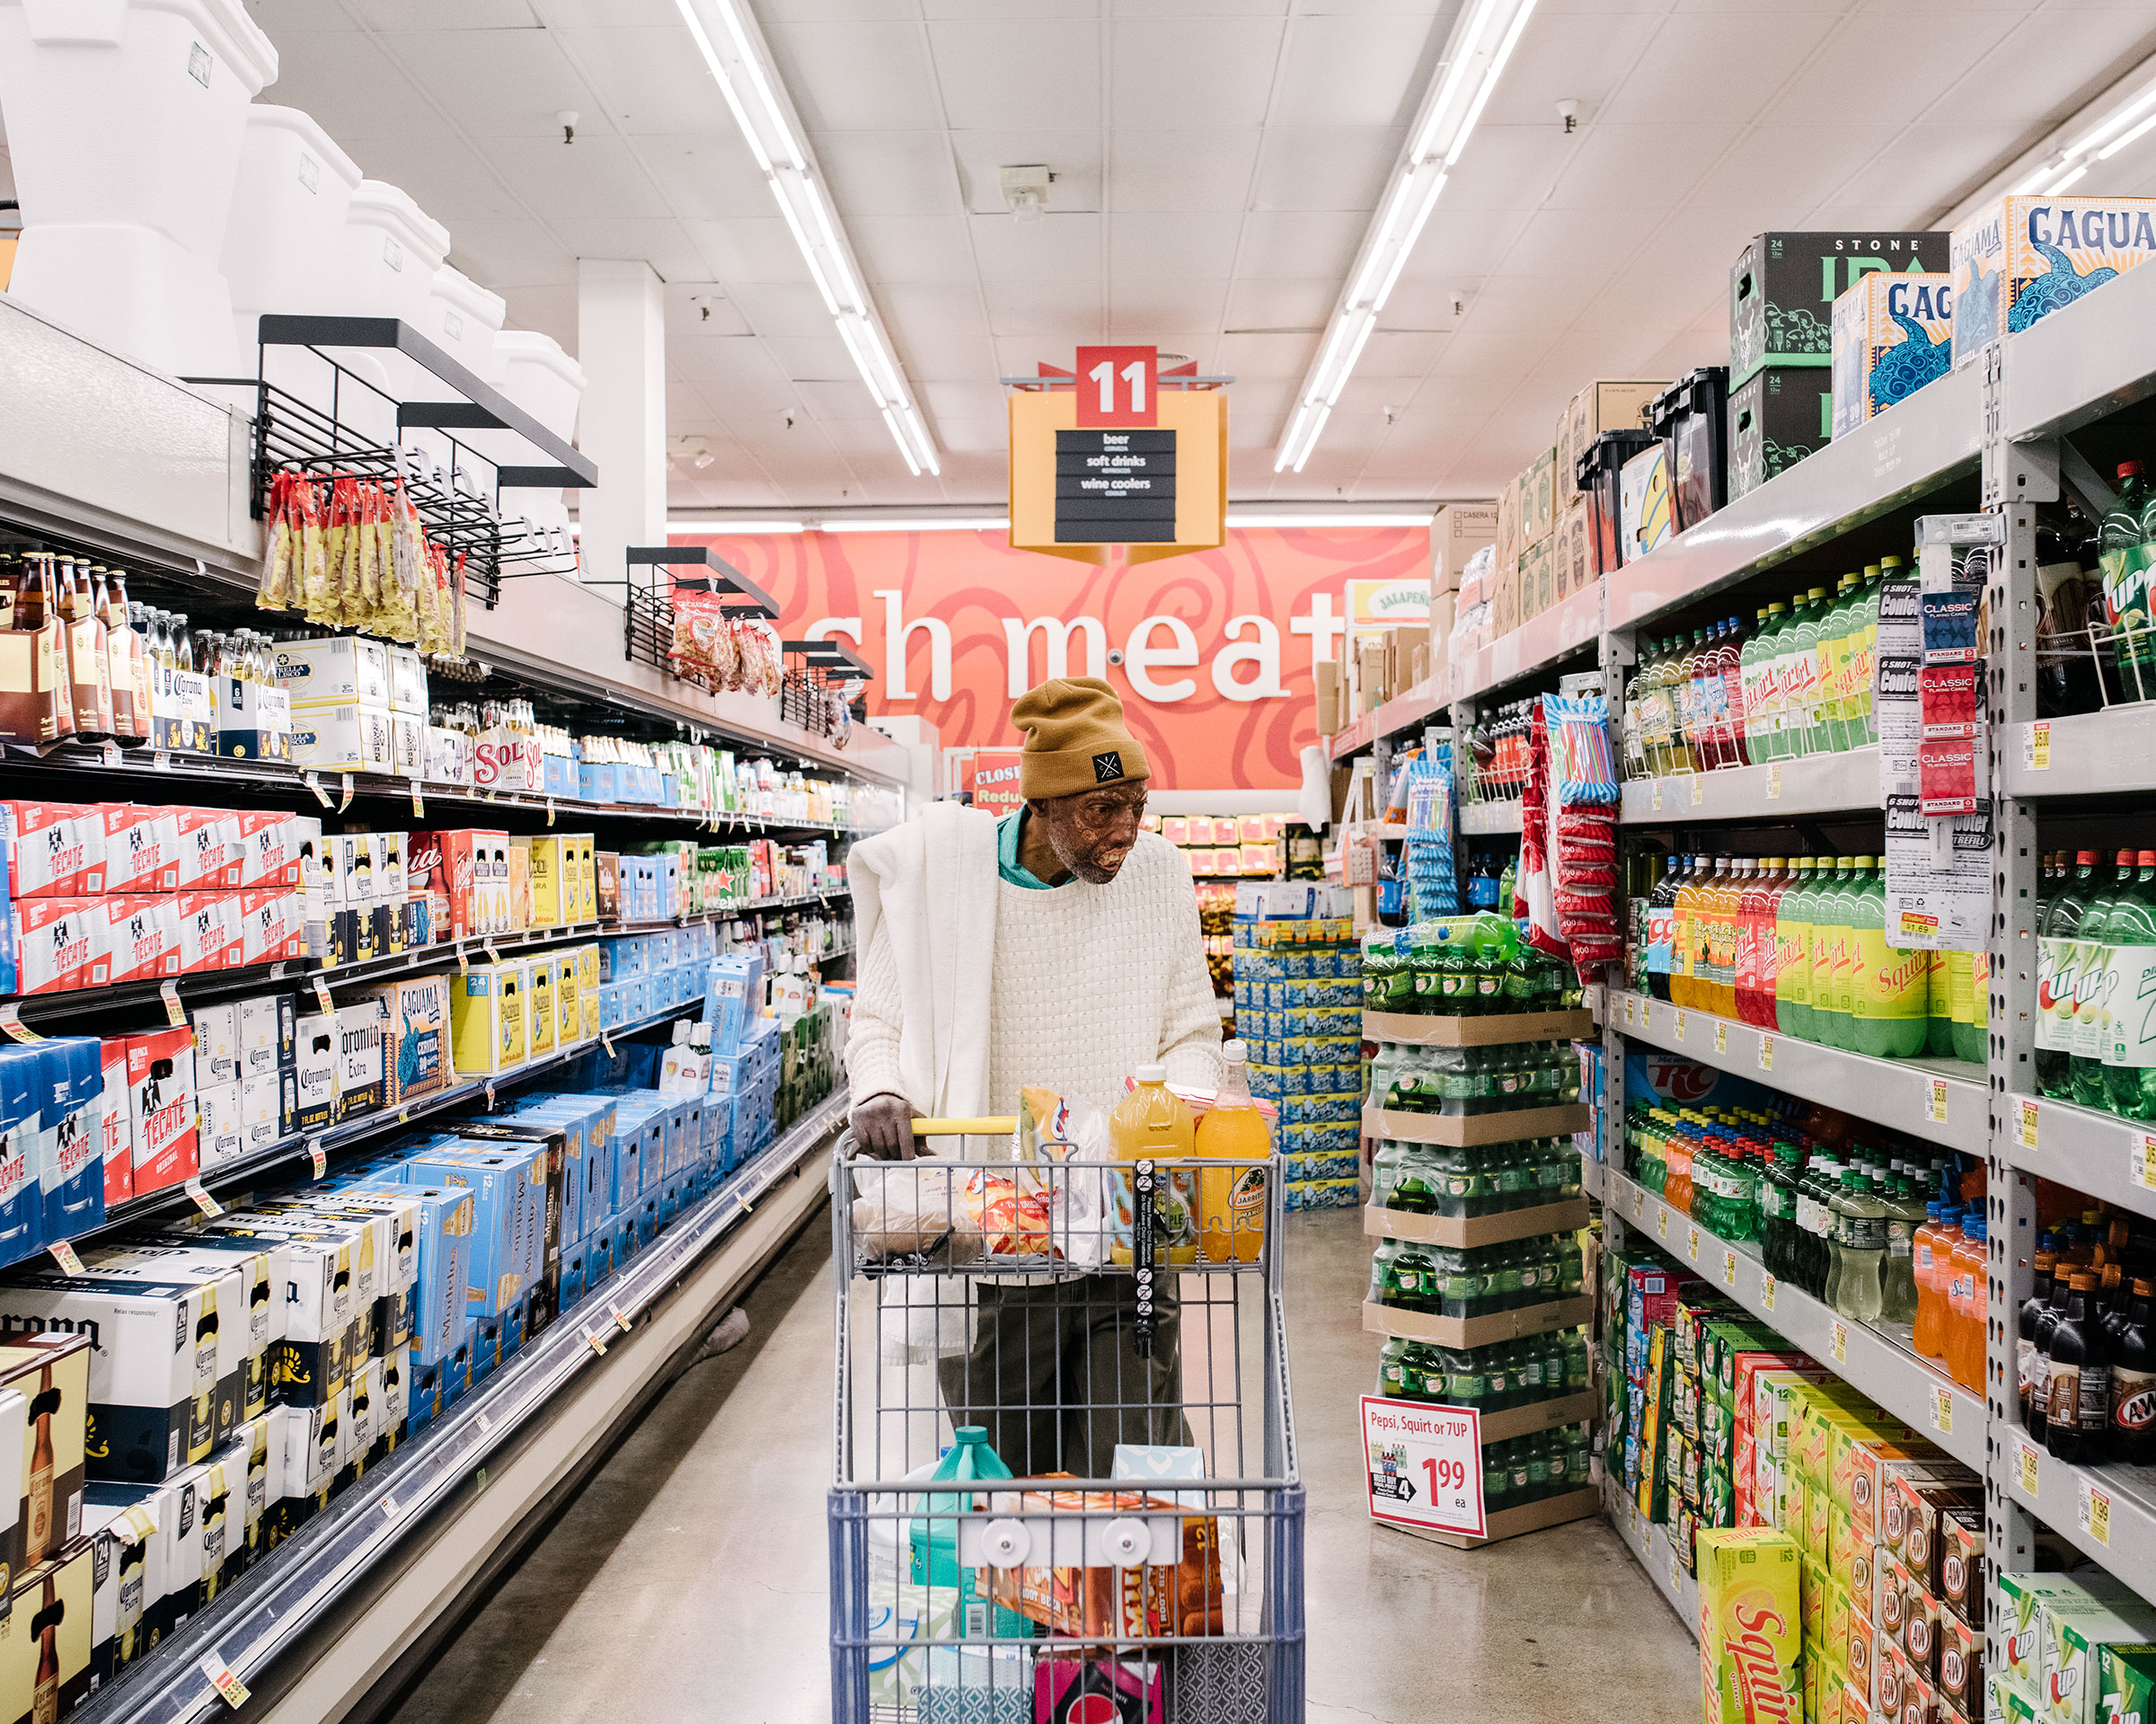 Robert Chelsea shops for groceries at a local market near a friend’s apartment where he was temporarily staying in Los Angeles in February 2019 (John Francis Peters for TIME)